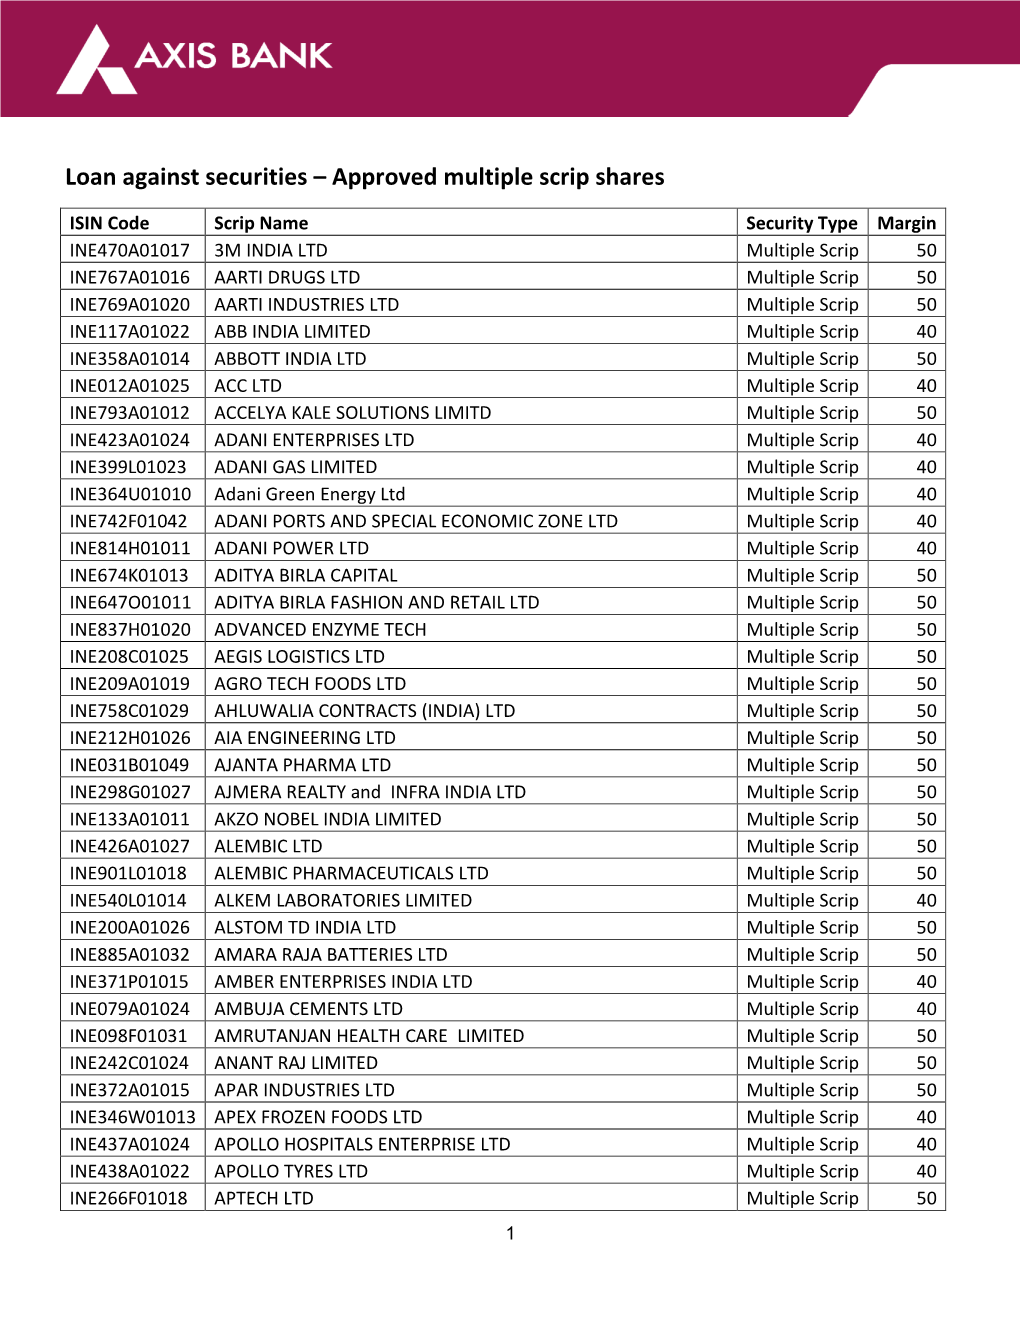 Approved Multiple Scrip Shares